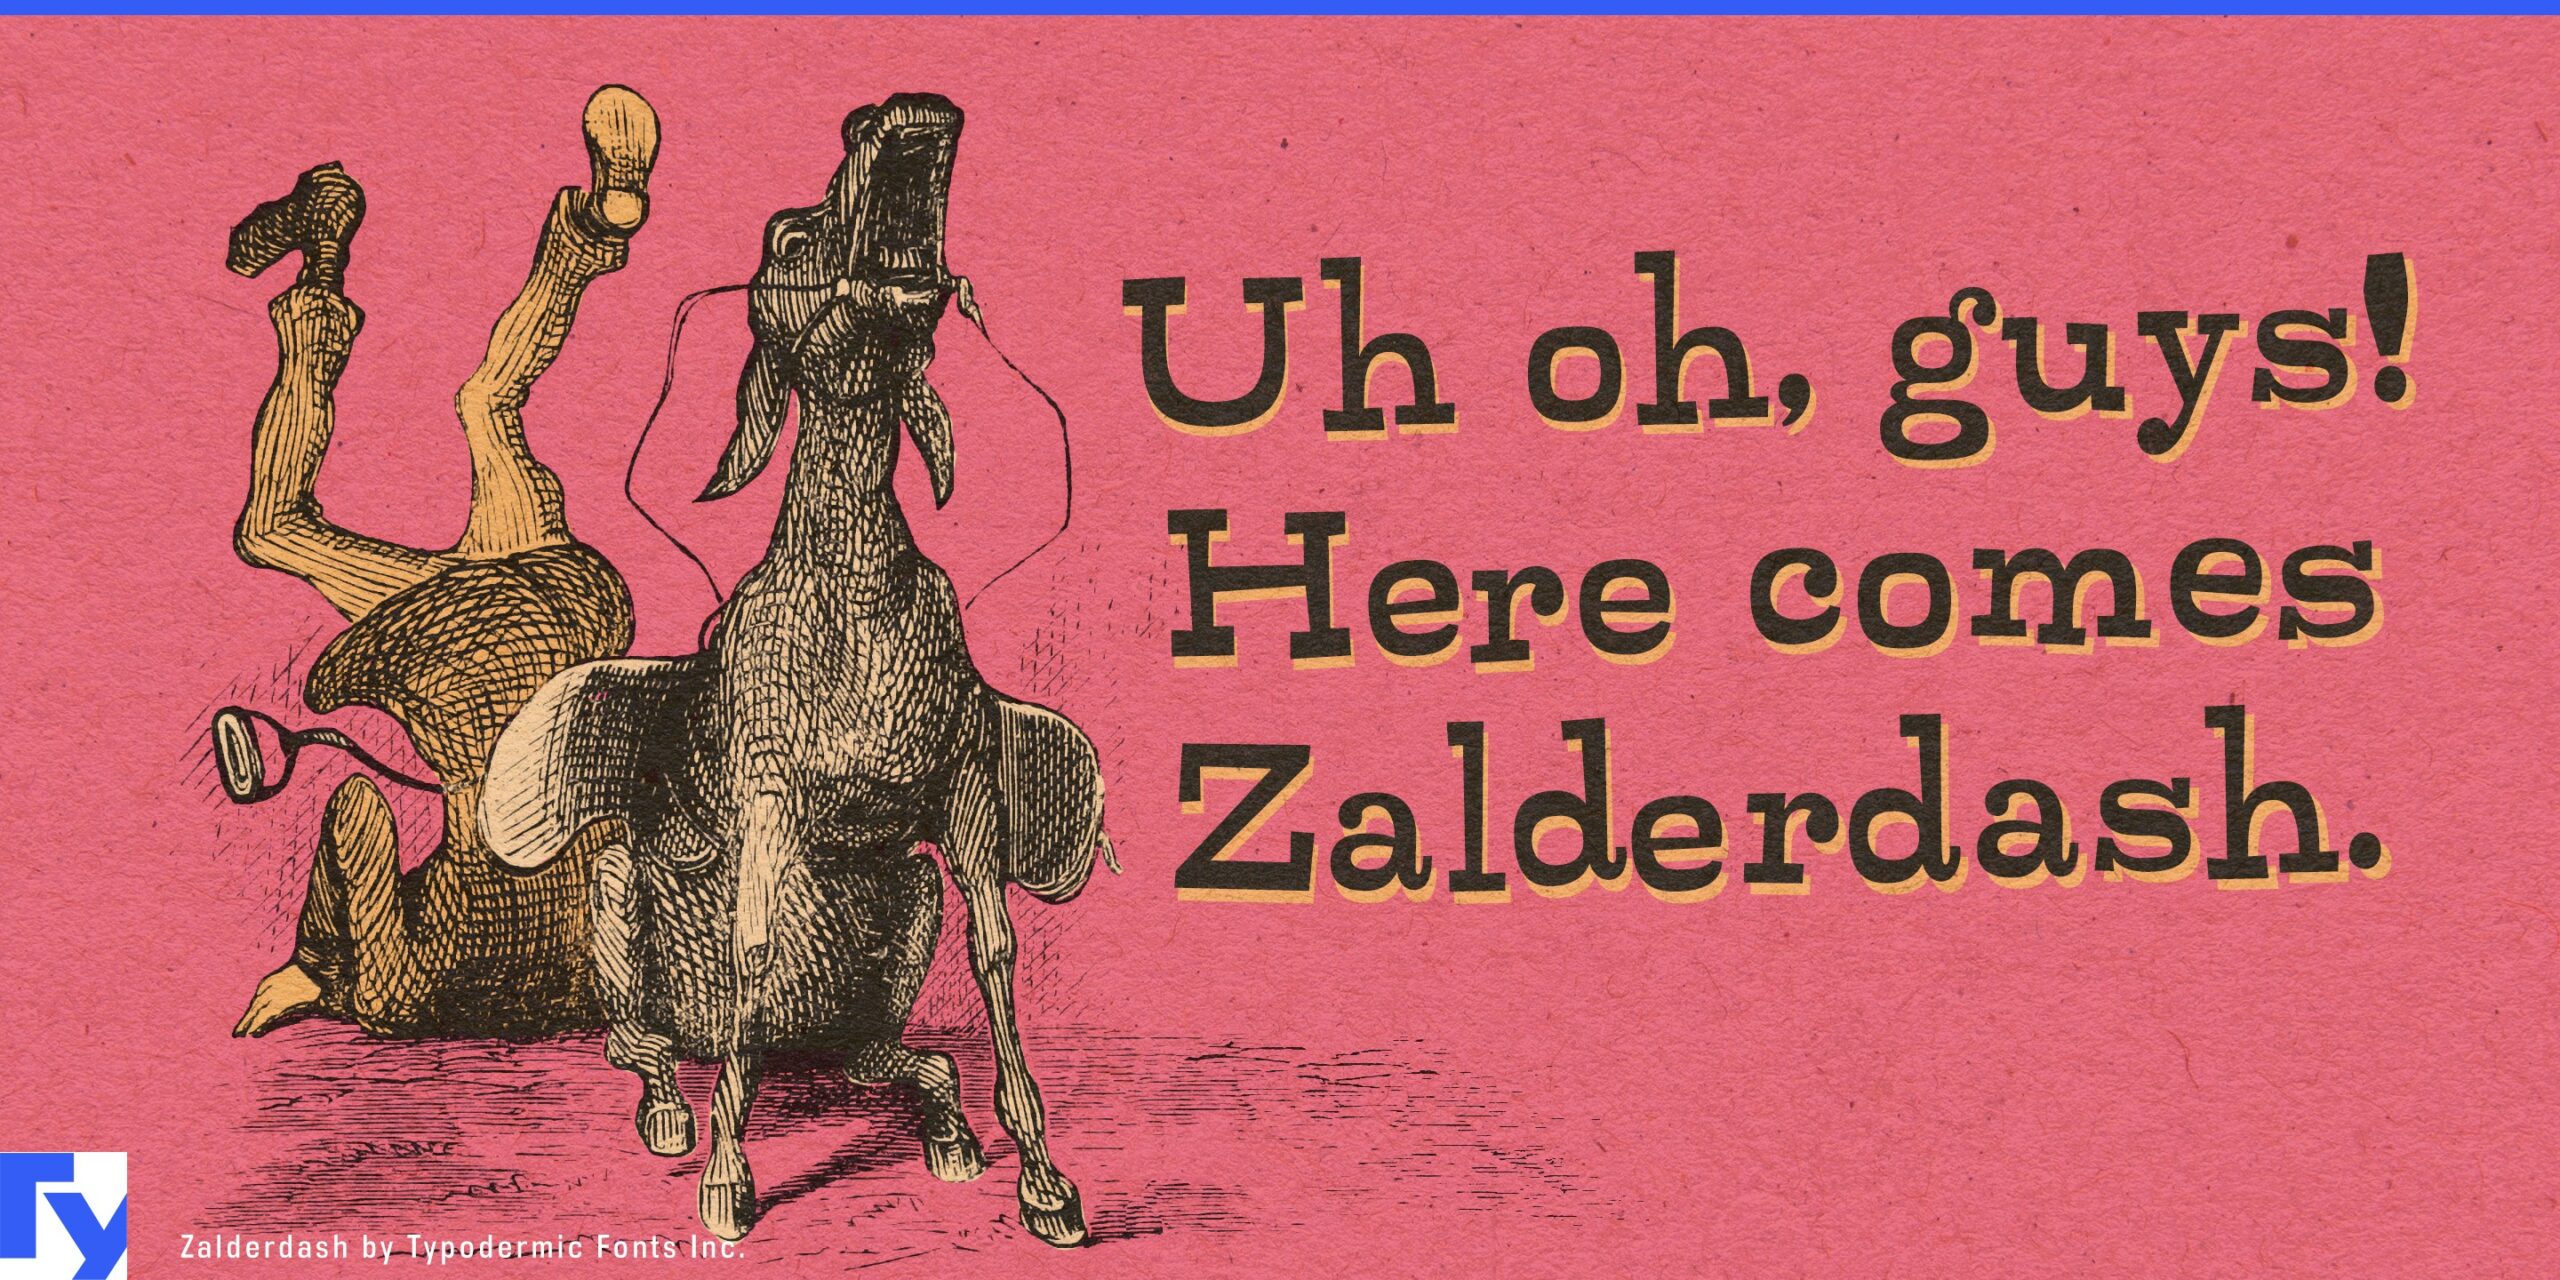 Freshest Thing Since Sliced Hay: Zalderdash Typeface Makes an Impact